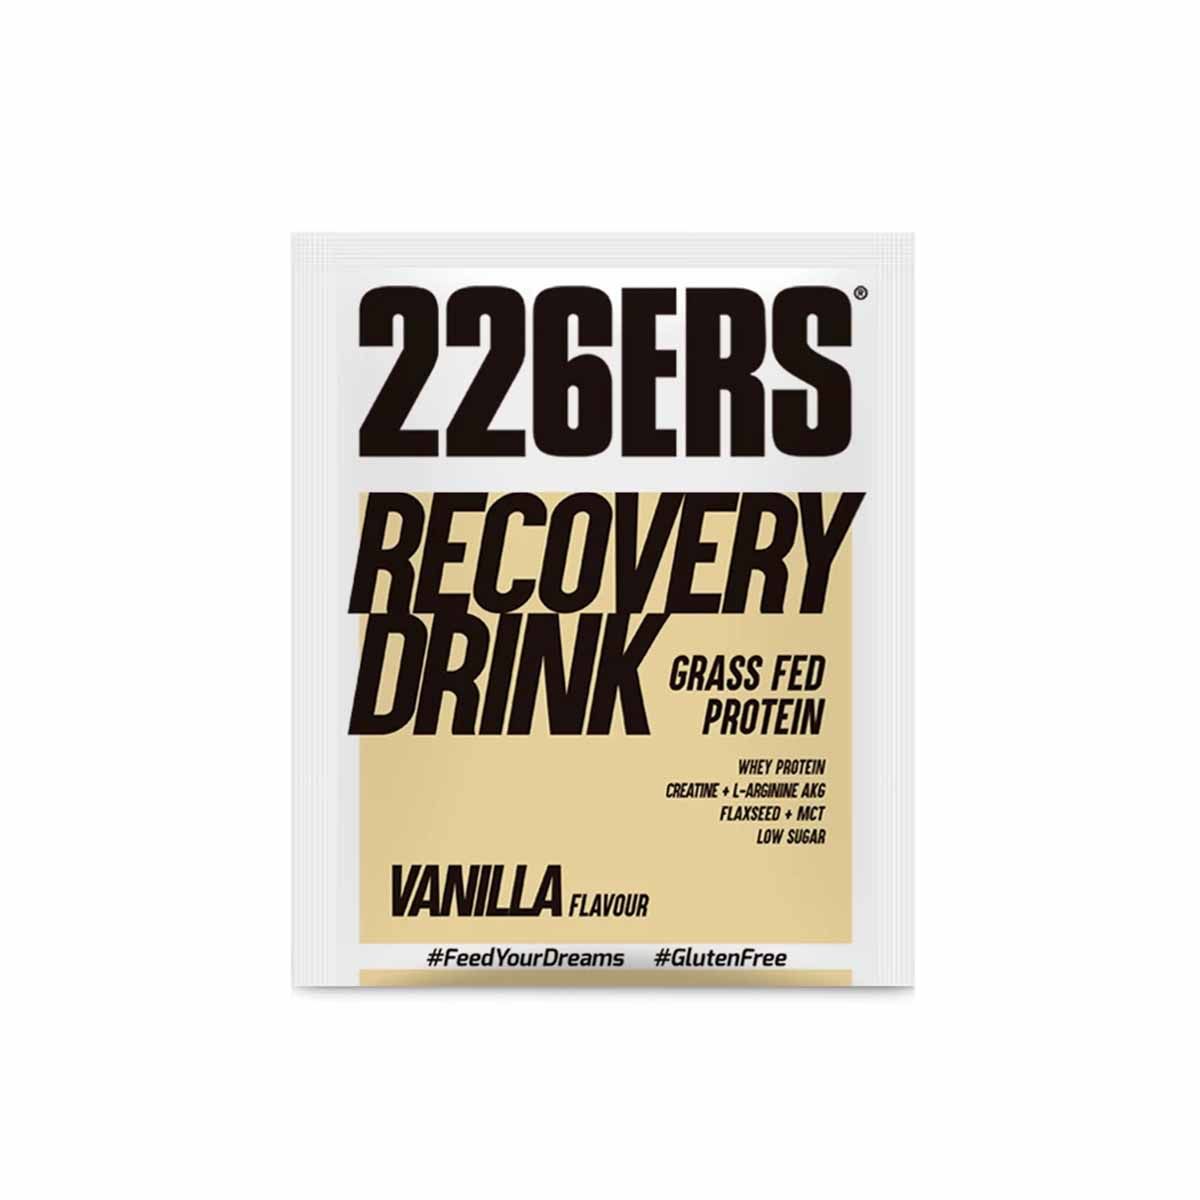 Recovery drink 226ers - Vanilla